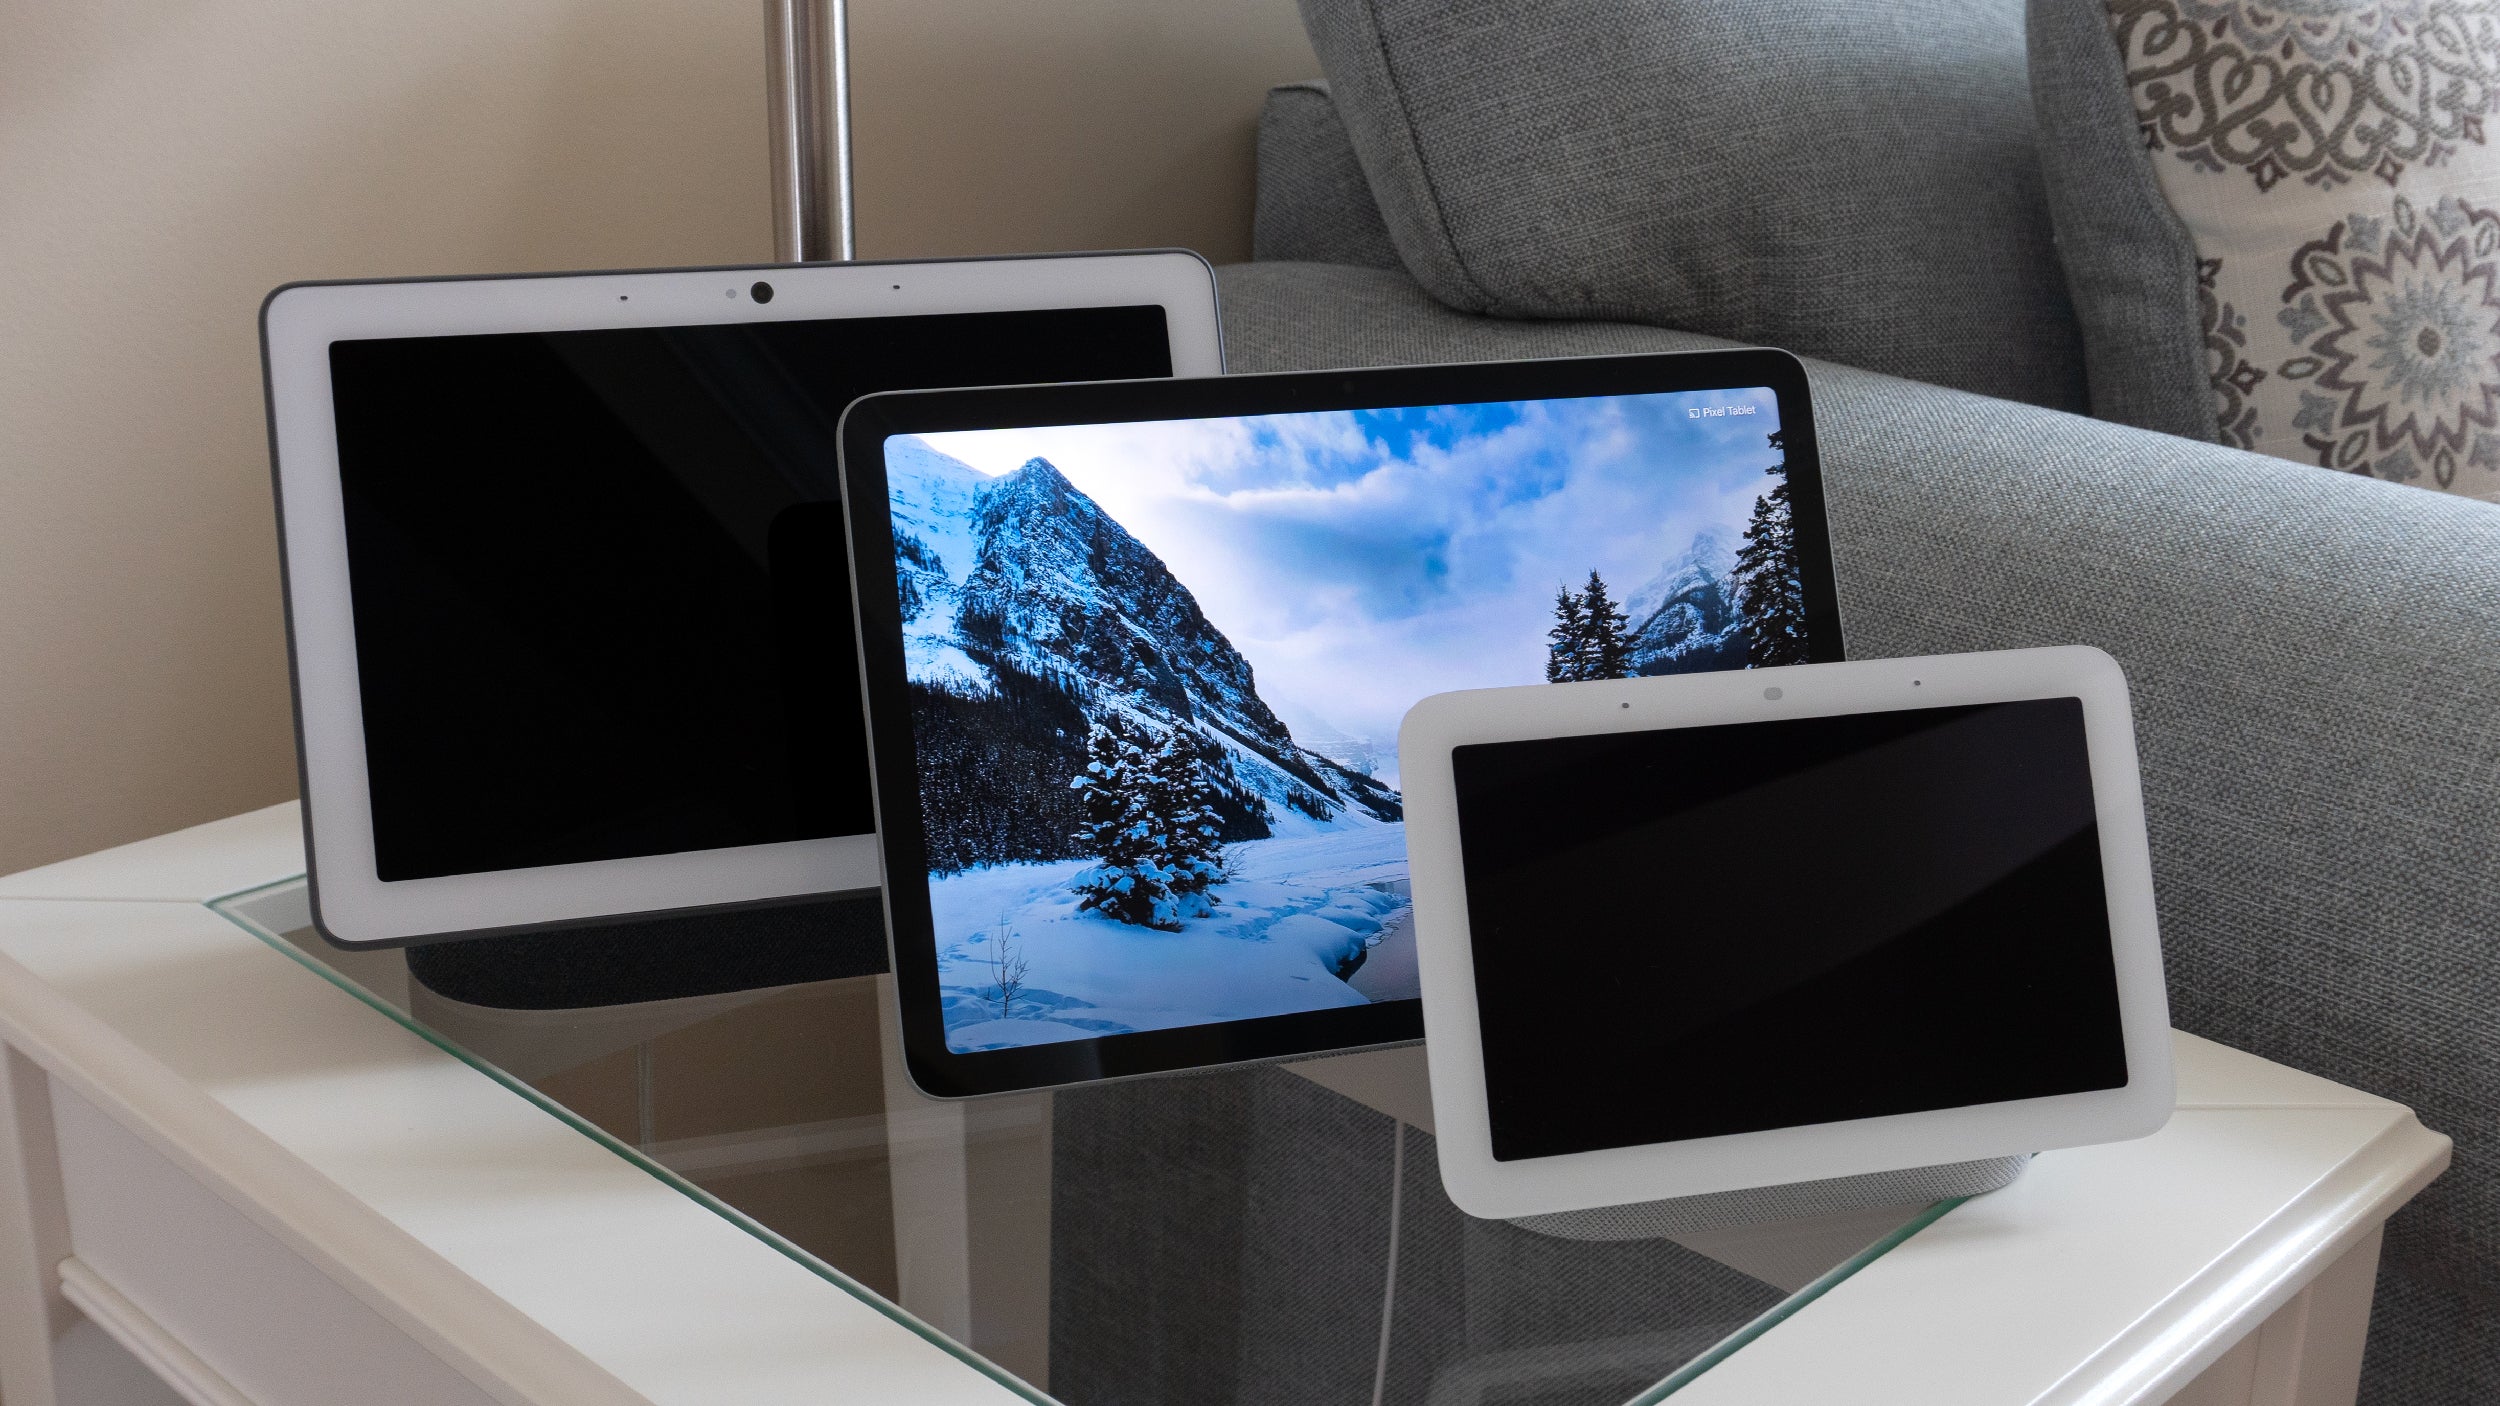 The Pixel Tablet (middle) feels roughly the same size as the Google Nest Hub Max (left) but much larger than the Google Nest Hub (right). (Photo: Andrew Liszewski | Gizmodo)